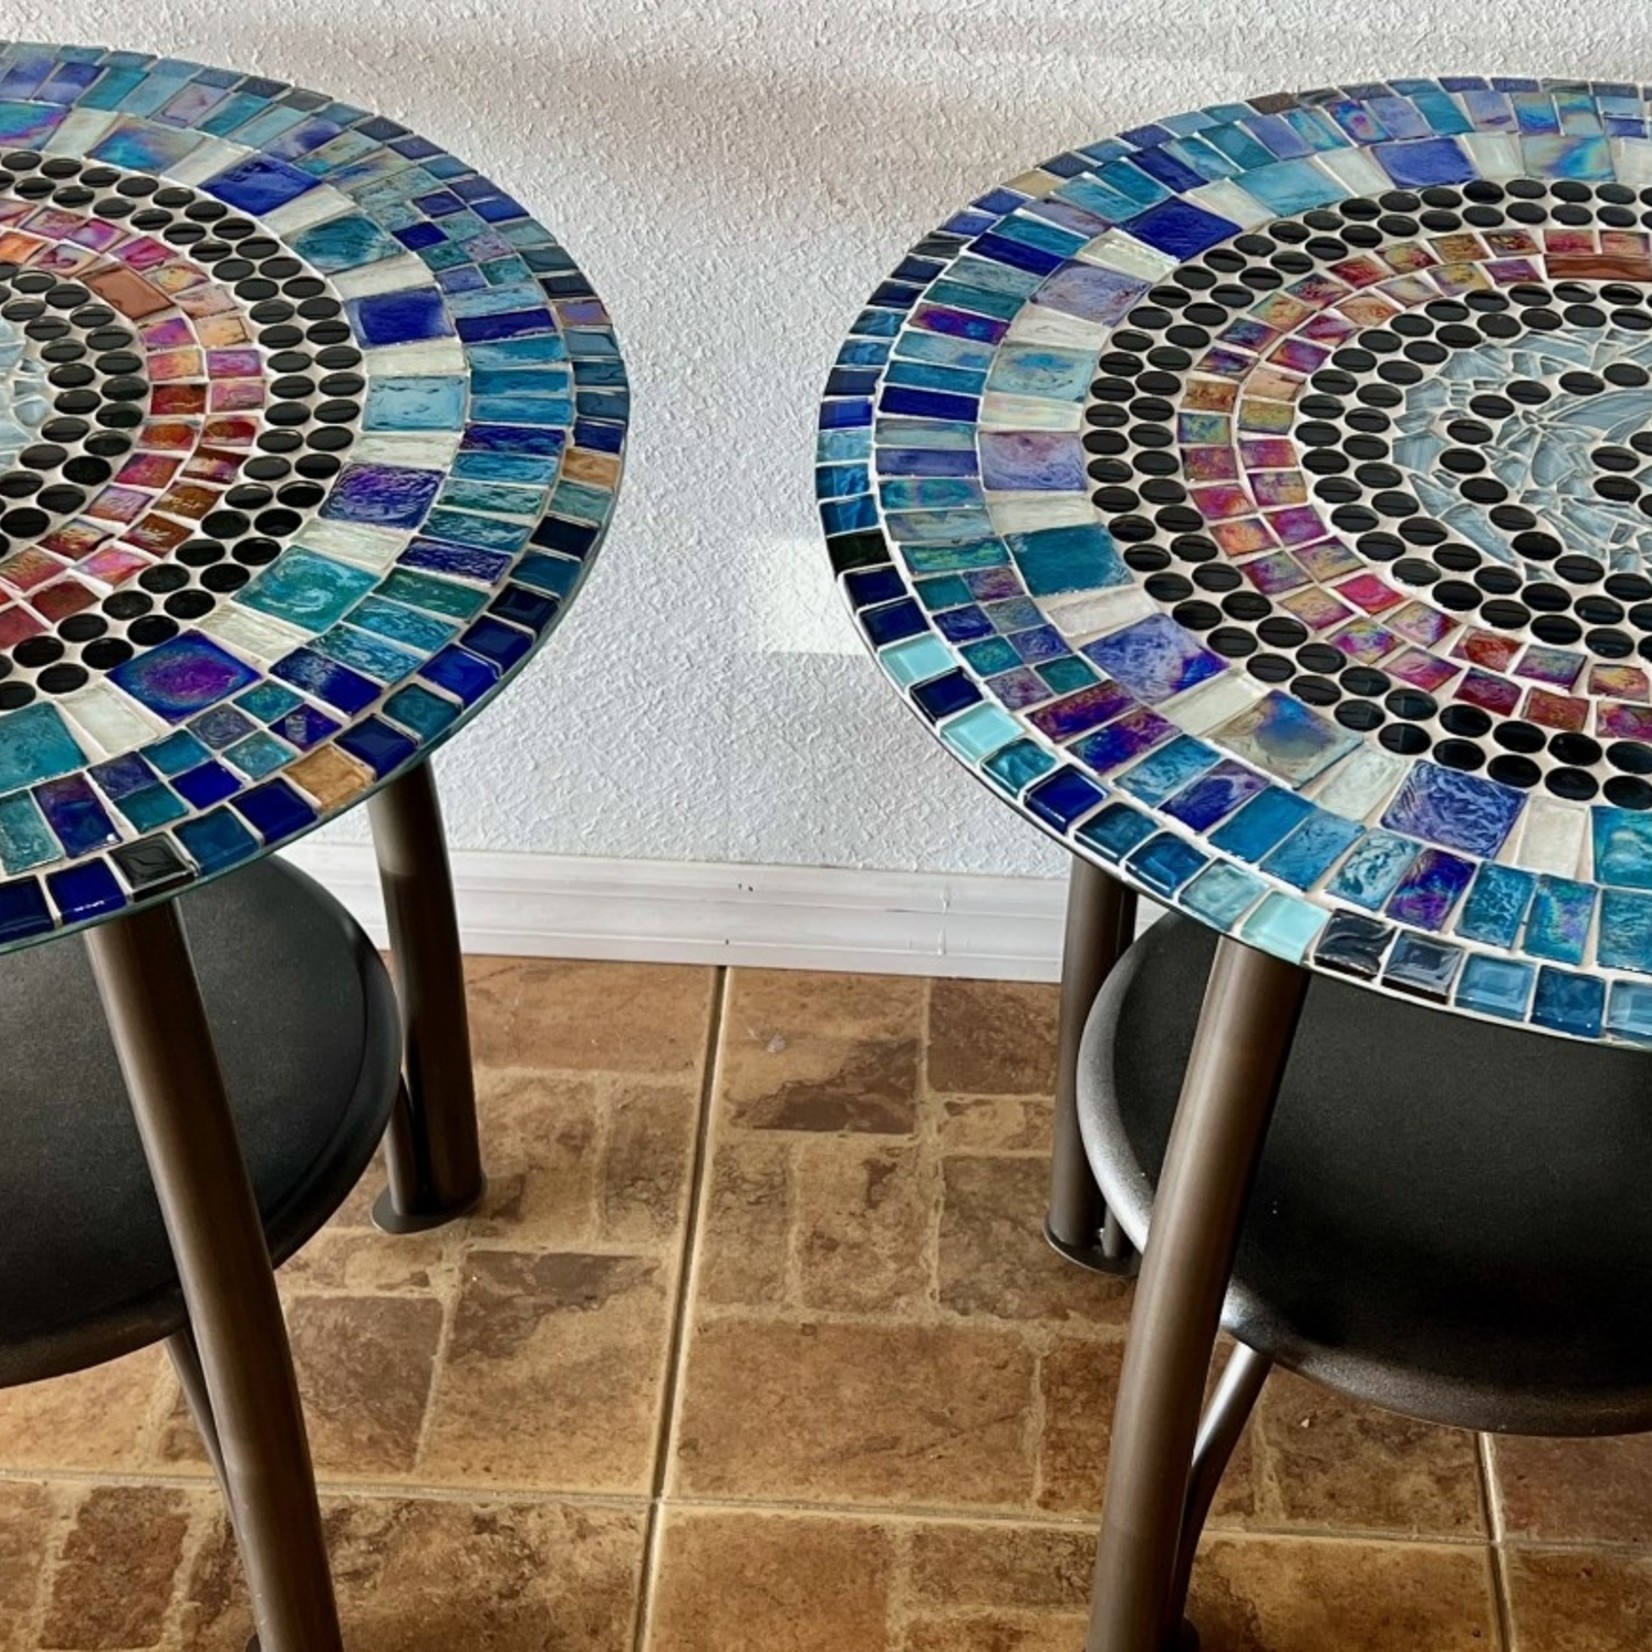 Designs by Ken Accent Table, glass on glass, mosaic, 25"dx26"h, DBK